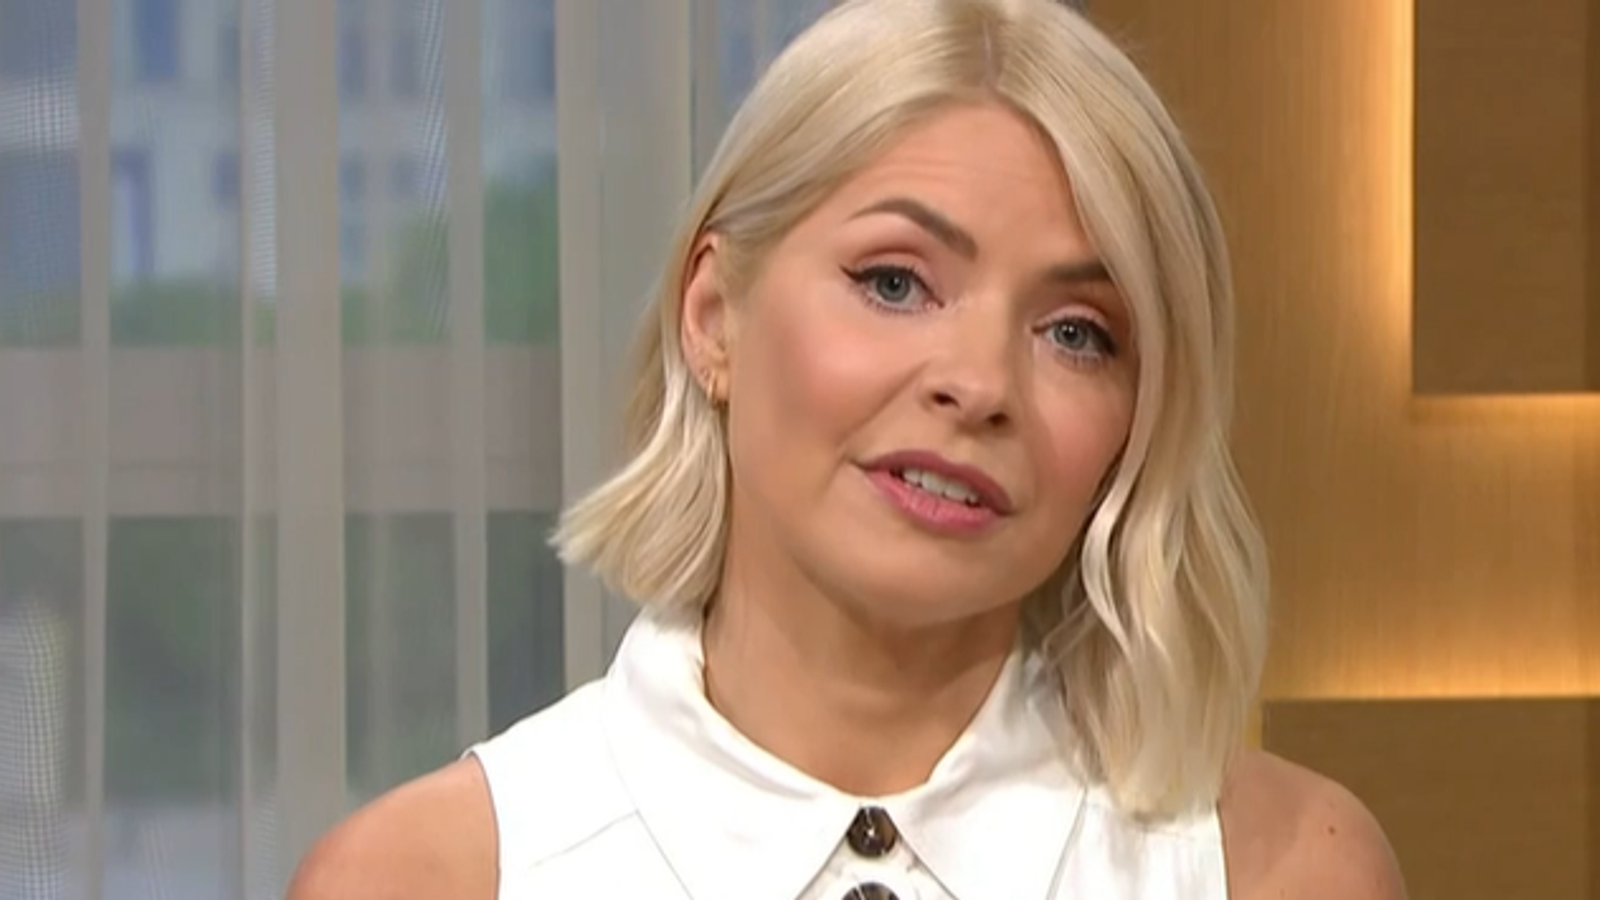 Holly Willoughby quits ITV's This Morning 'for me and my family'